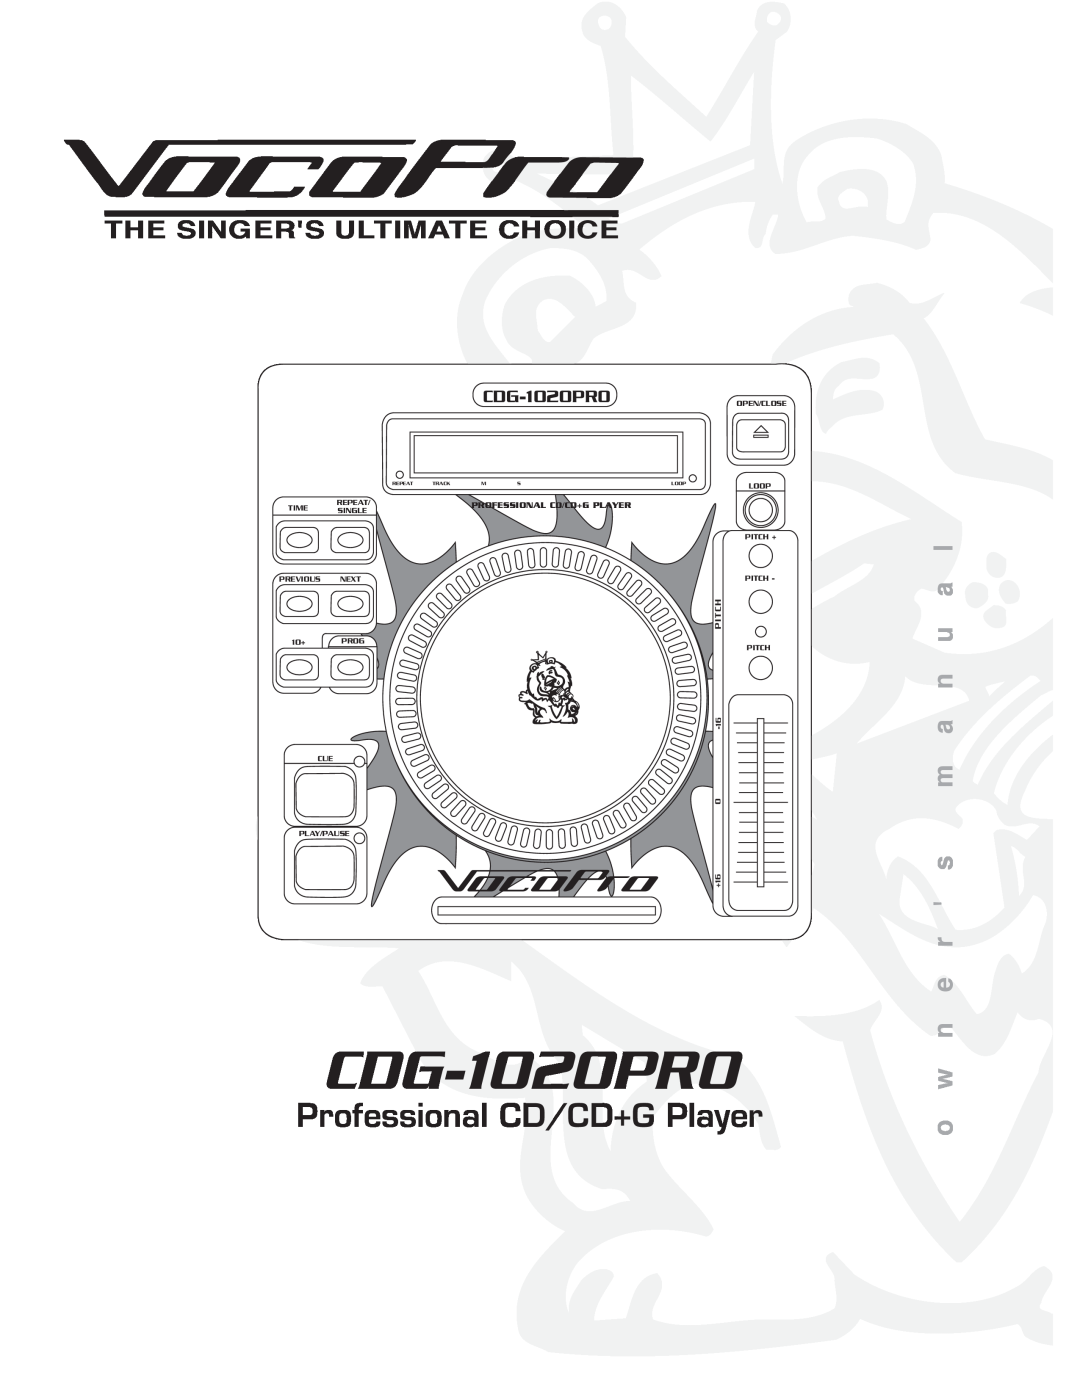 VocoPro CDG-1020PRO owner manual Professional CD/CD+G Player, o w n e r s m a n u a l, The Singers Ultimate Choice 